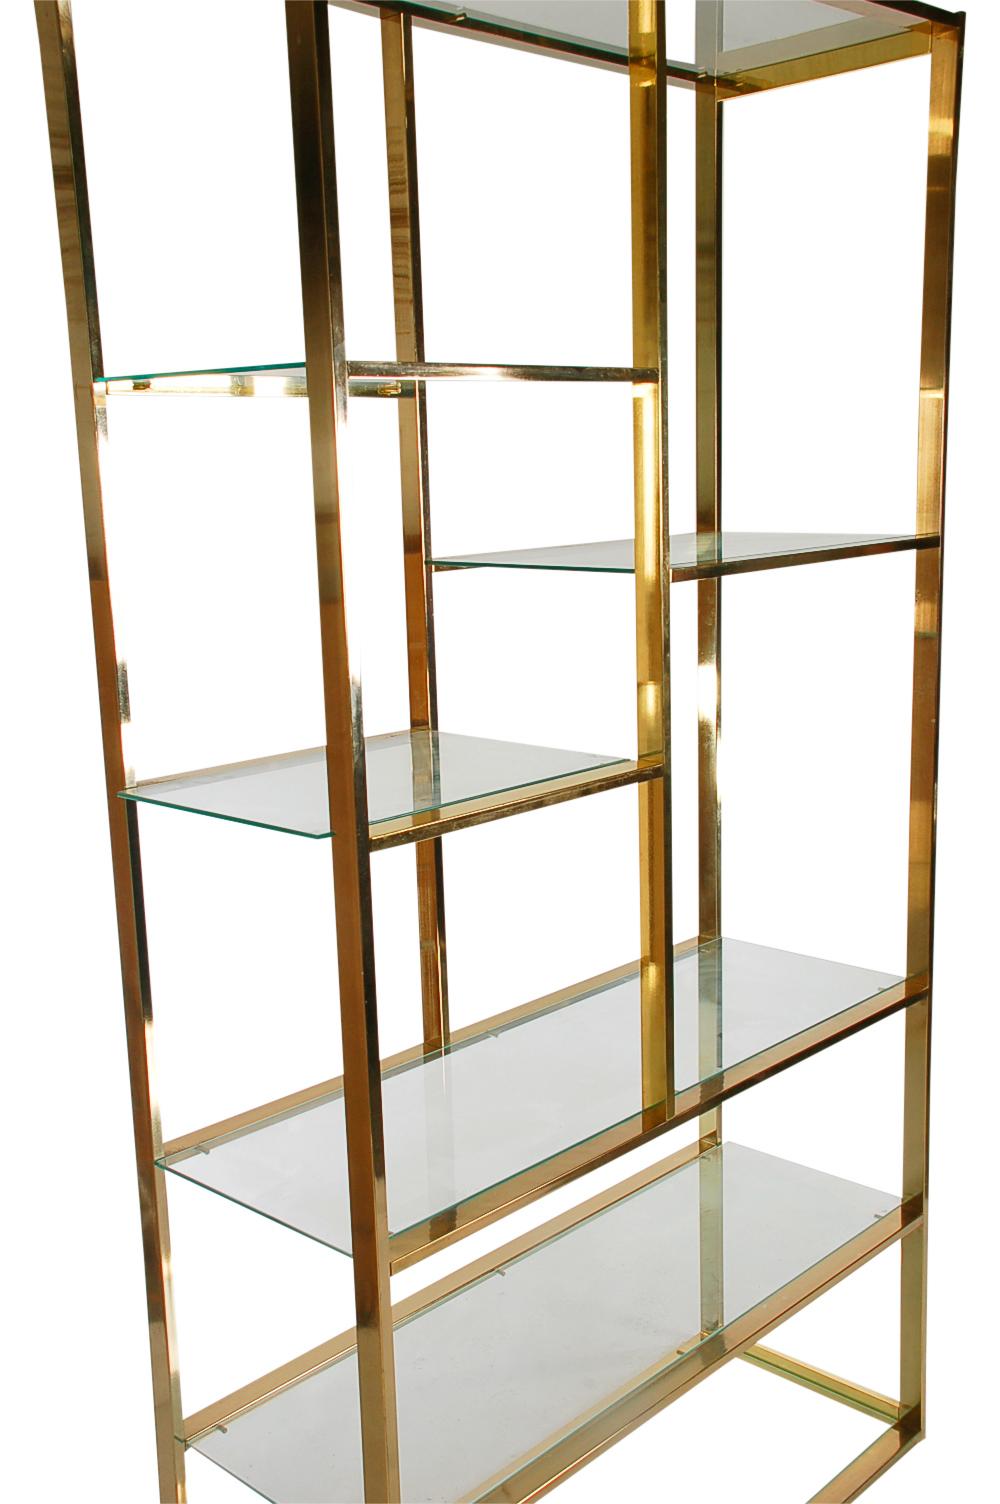 American Hollywood Regency Brass and Glass Wall Unit or Shelving Unit after Milo Baughman